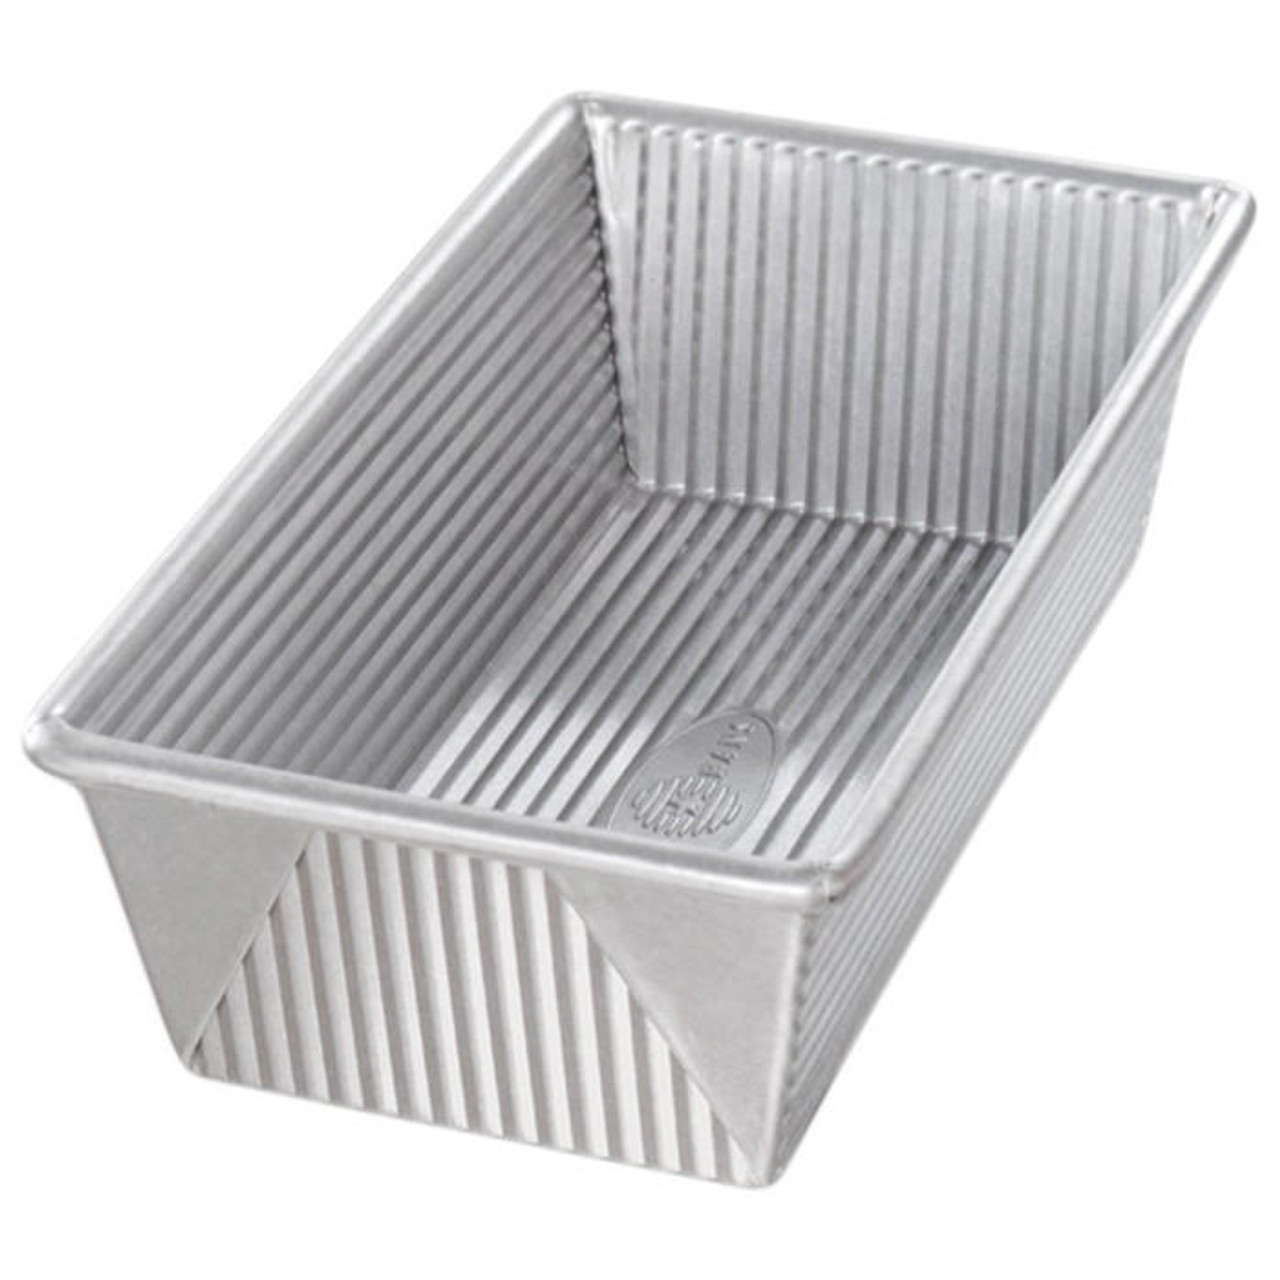 Fat Daddios Anodized Aluminum Bread Pan (9 x 5 x 2.5) in Loaf